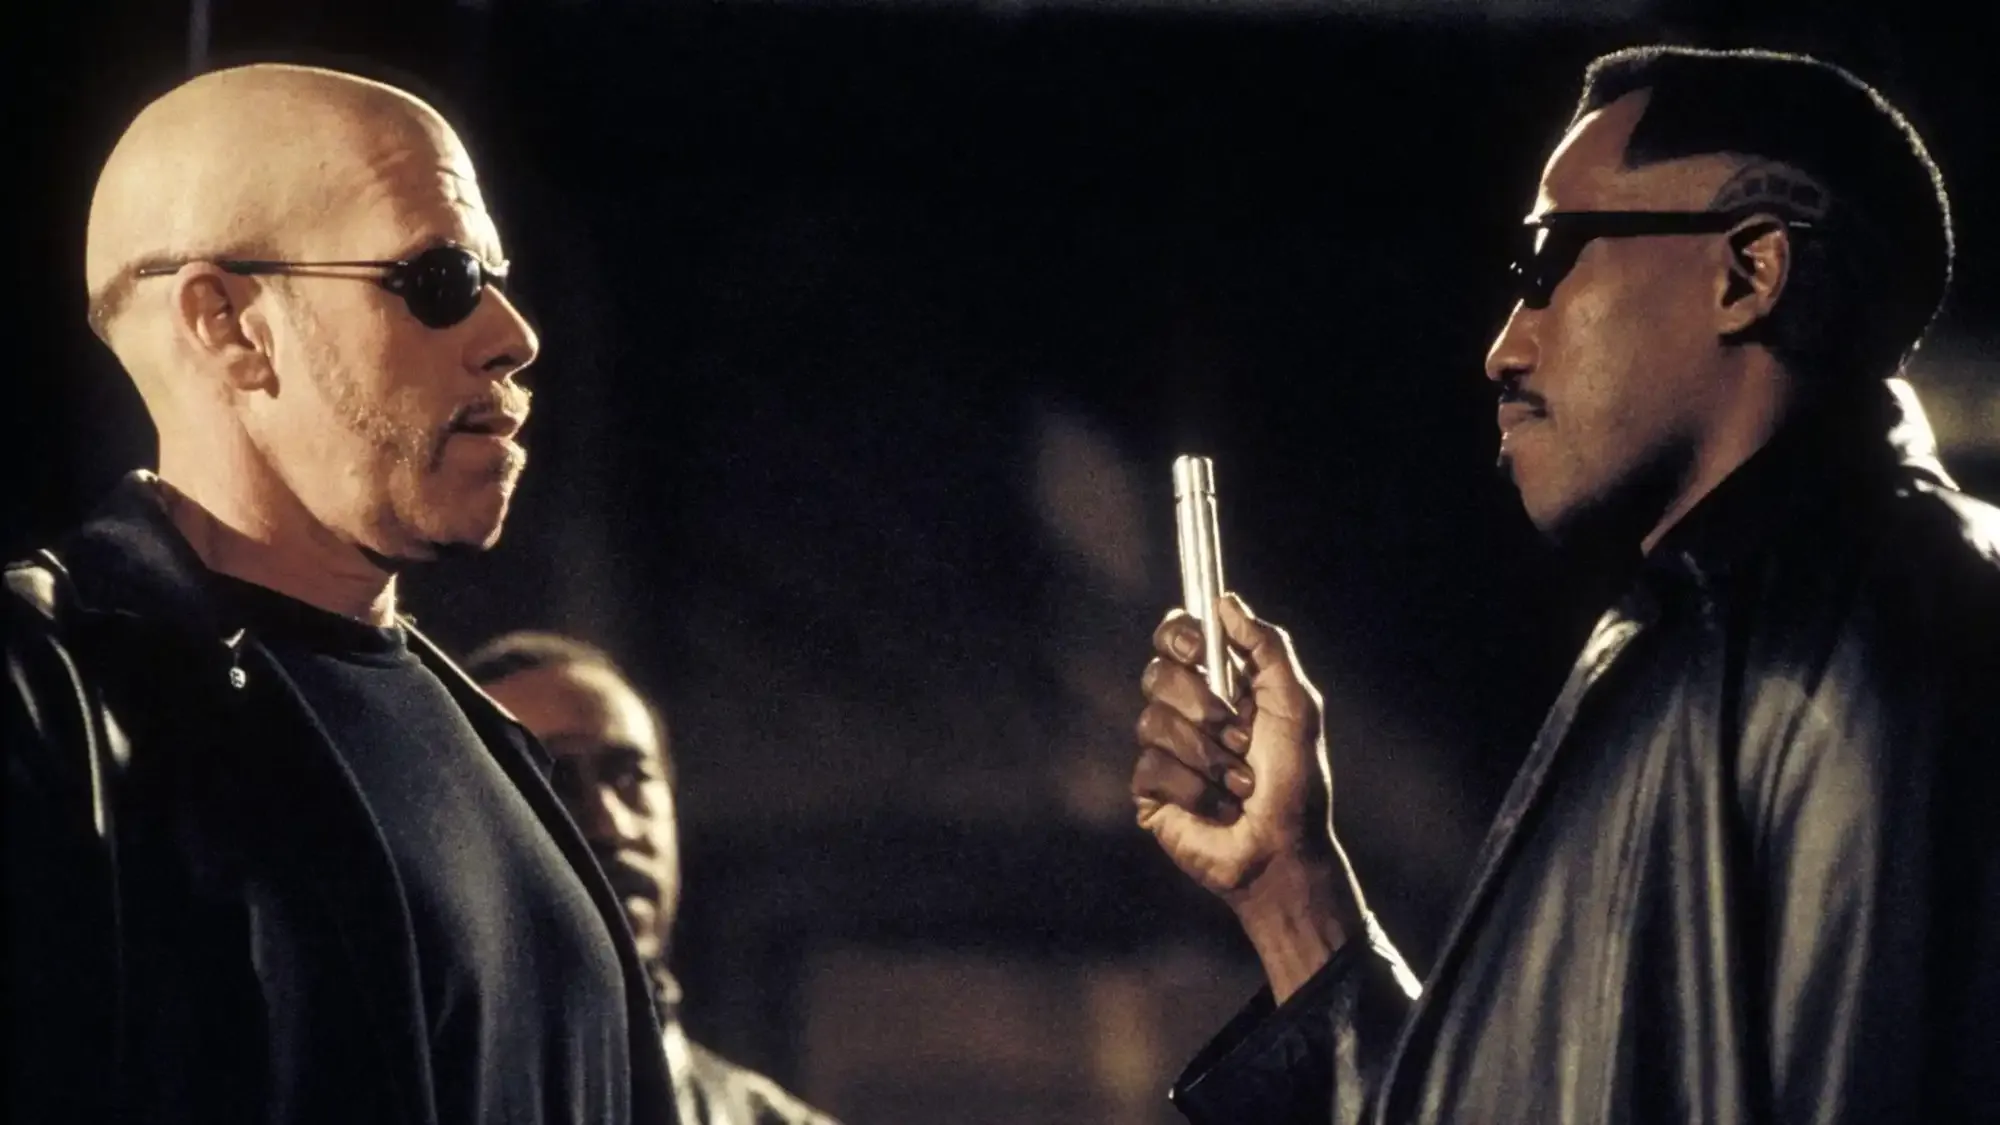 Blade II movie review